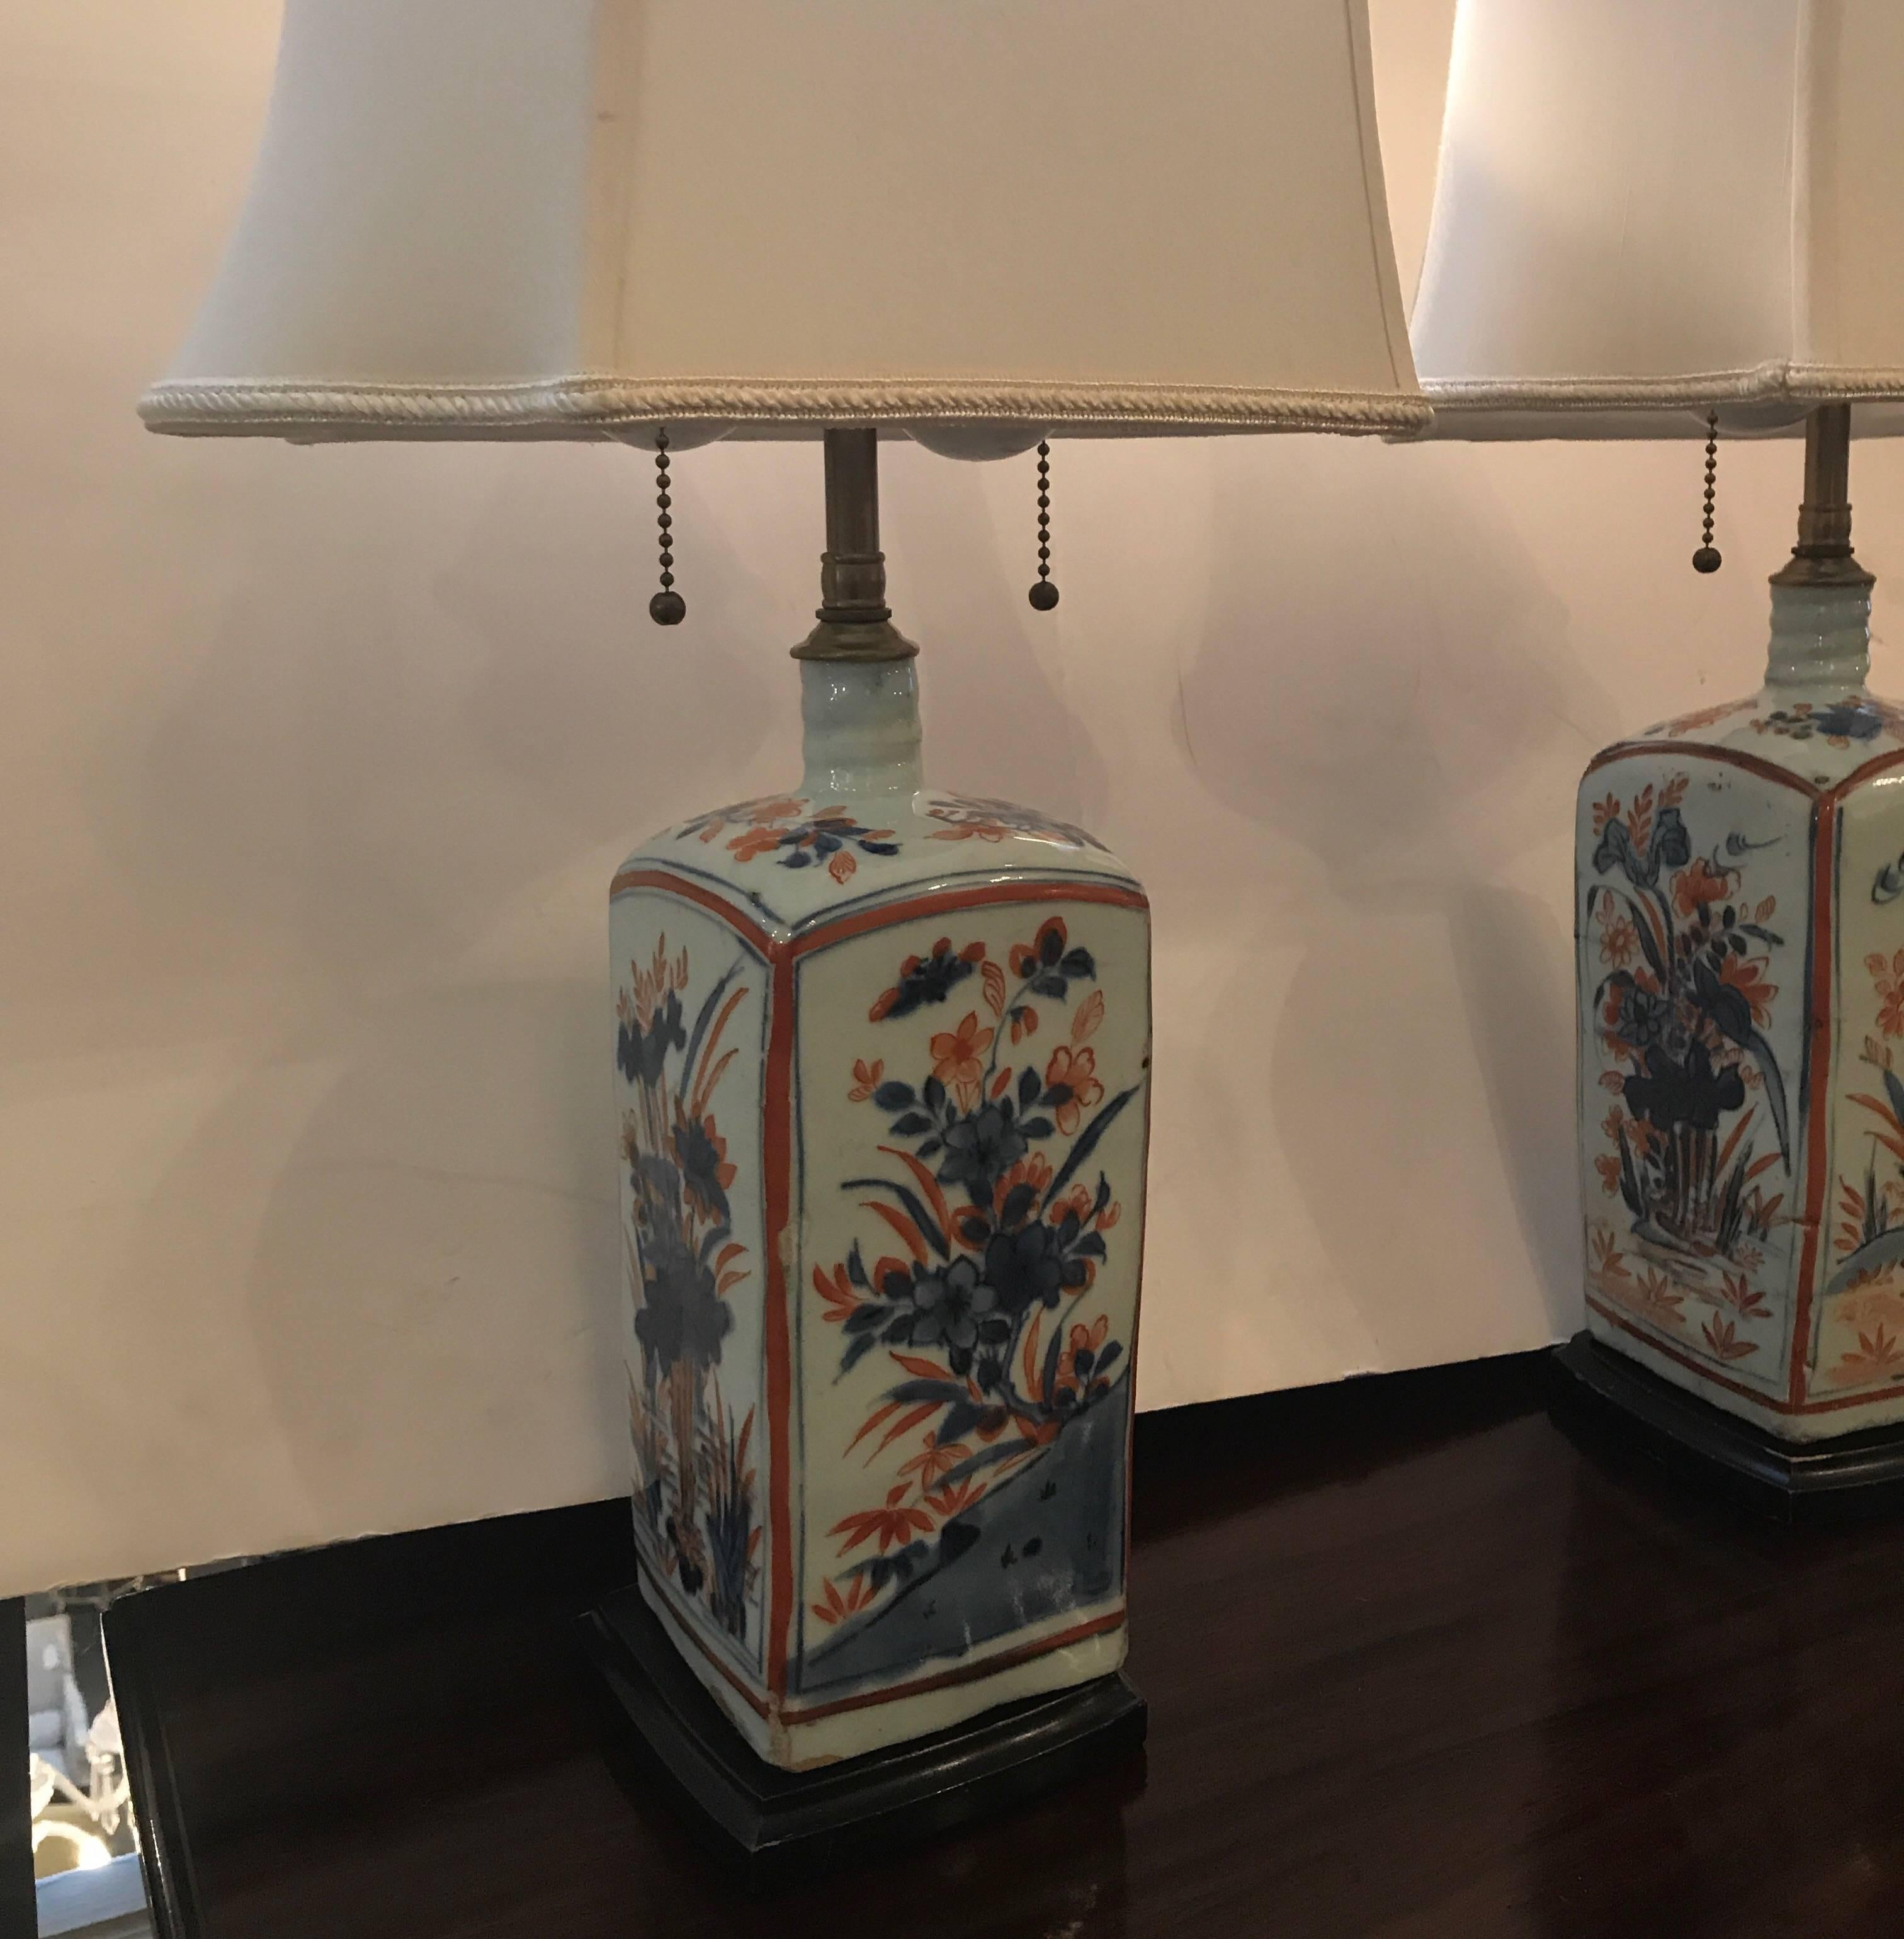 A pair of Imari pattern porcelain lamps. Although Imari is usually Japanese, these may be of Chinese origin. The porcelain is mid-late 18th century and was converted to lamps in the early part of the 20th century. Topped with custom silk shades.